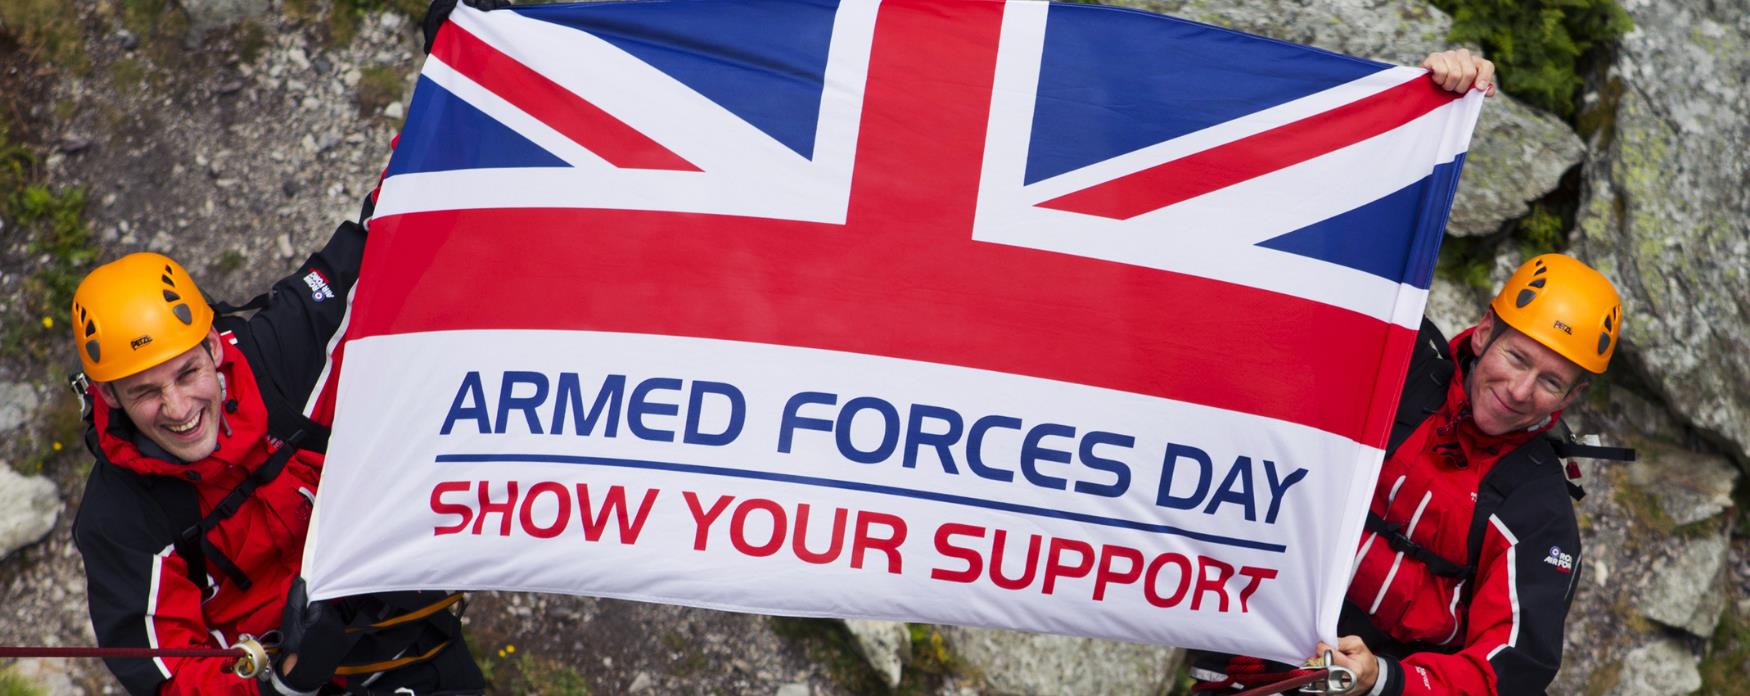 Soldiers abseiling down cliff holding banner for Armed Forces Day